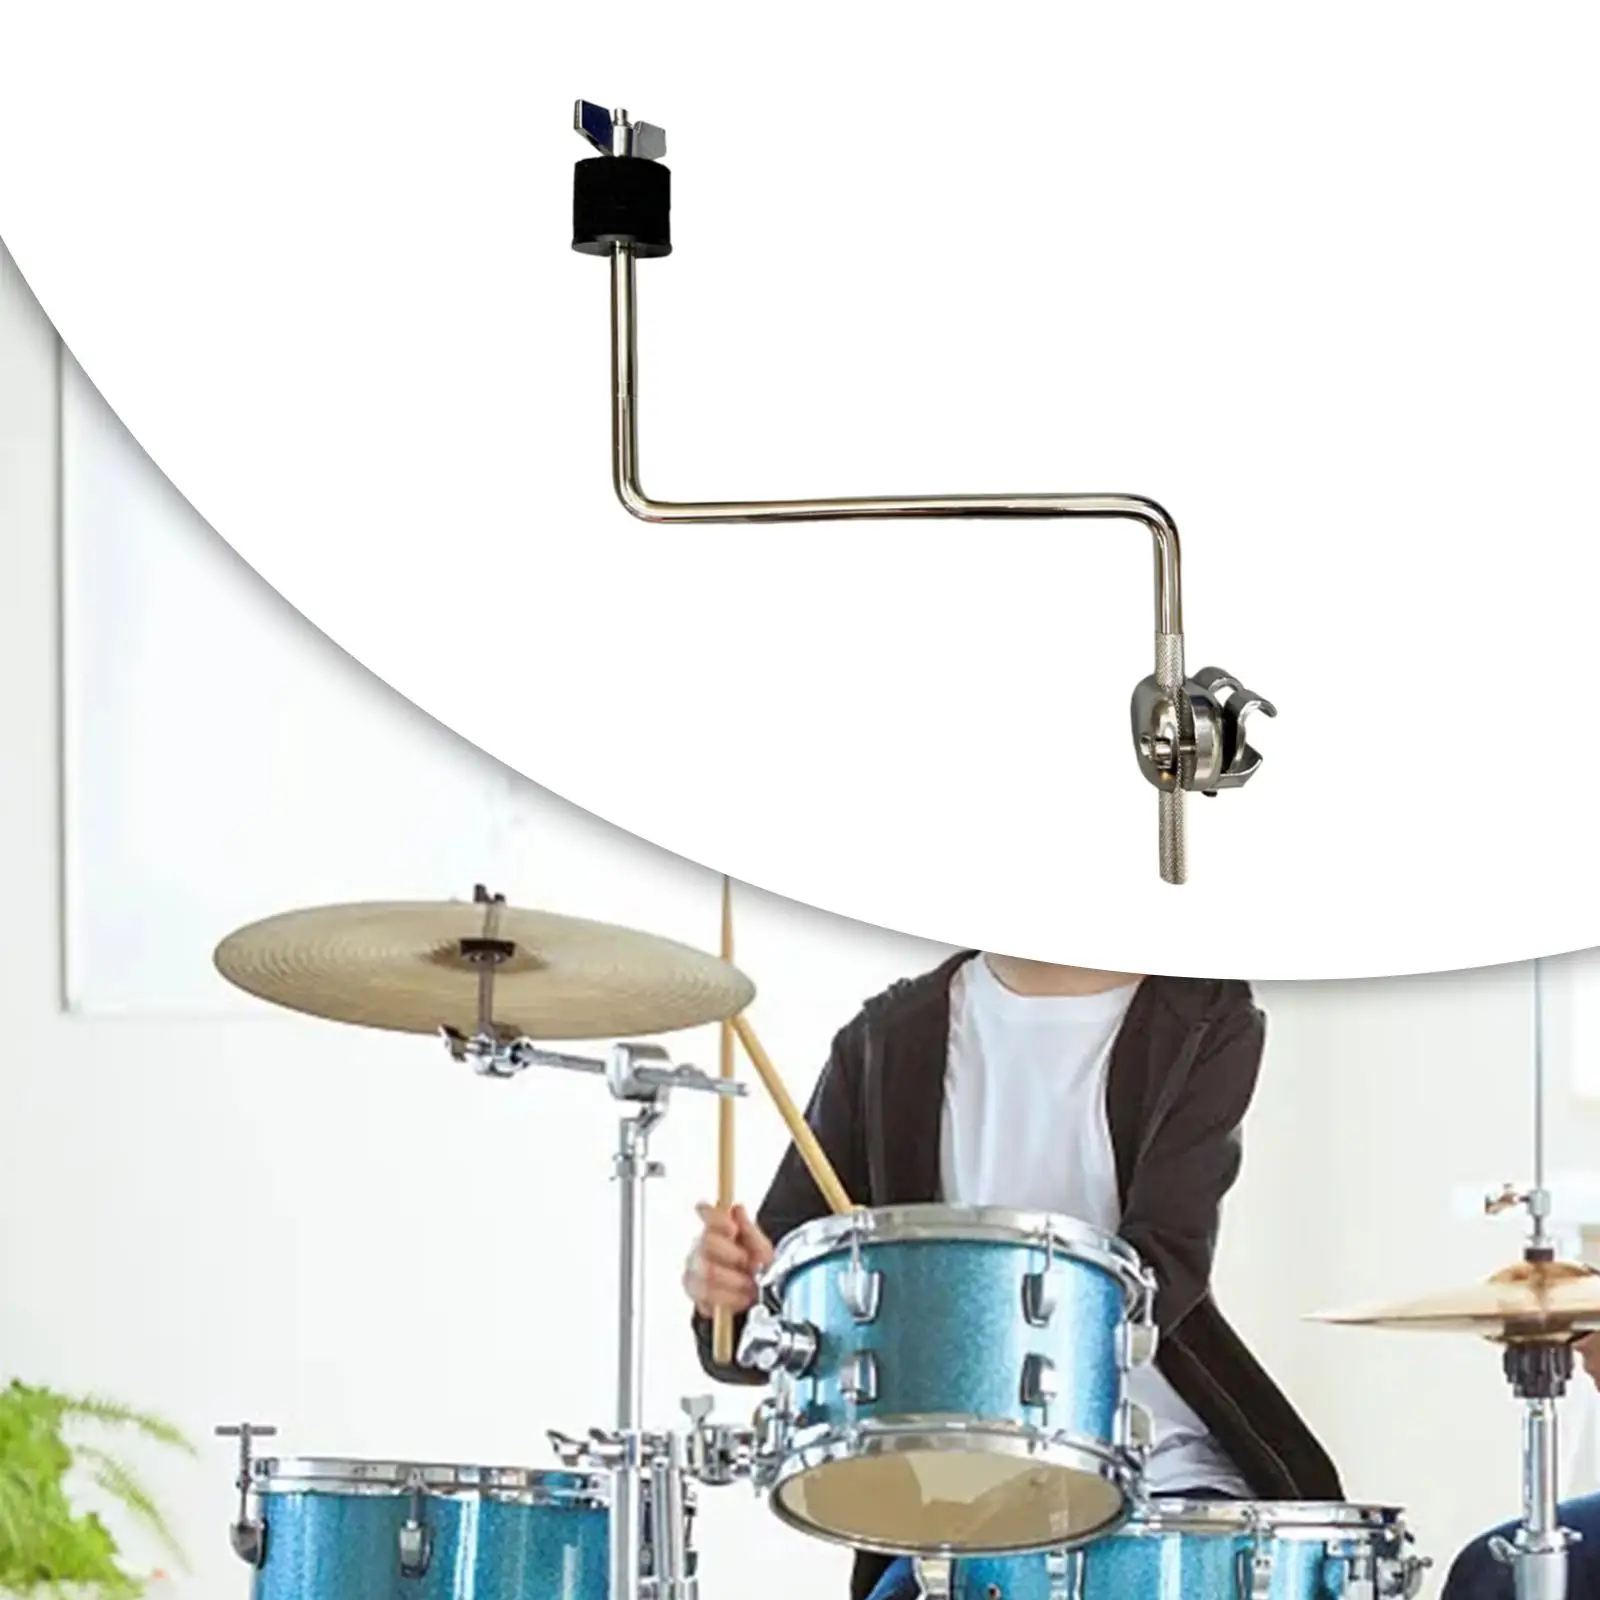 Cymbal Mount Cymbal Expand Arm Sturdy Replacement Removable Z Shaped Drum Clamp Holder Percussion Mounting Arms